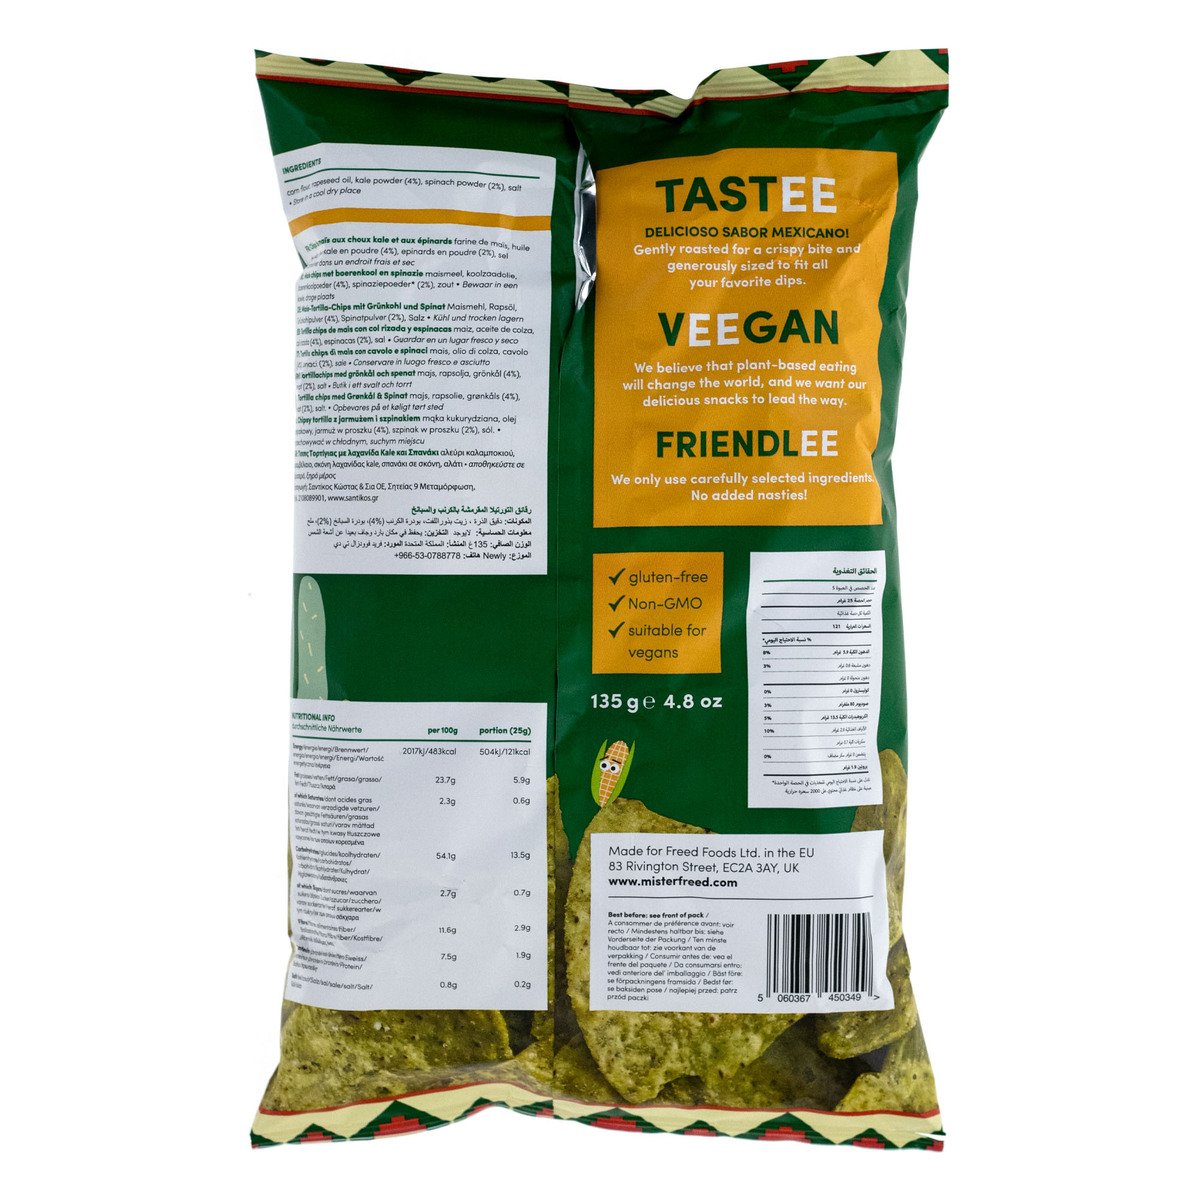 Mister Freed Gluten Free Kale & Spinach Tortilla Chips 135 g